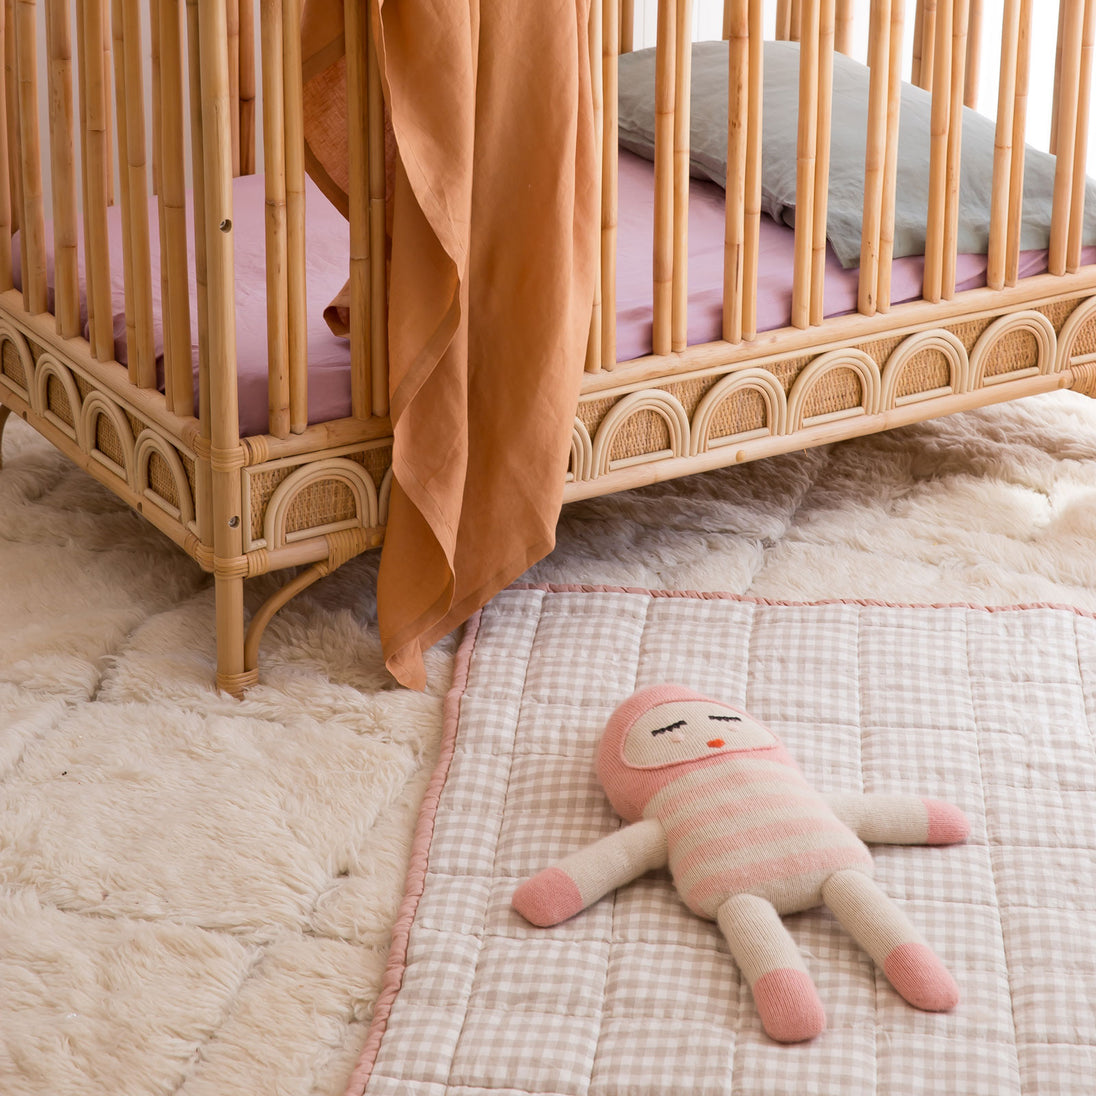 French Flax Linen Cot Sheet in Clay Gingham